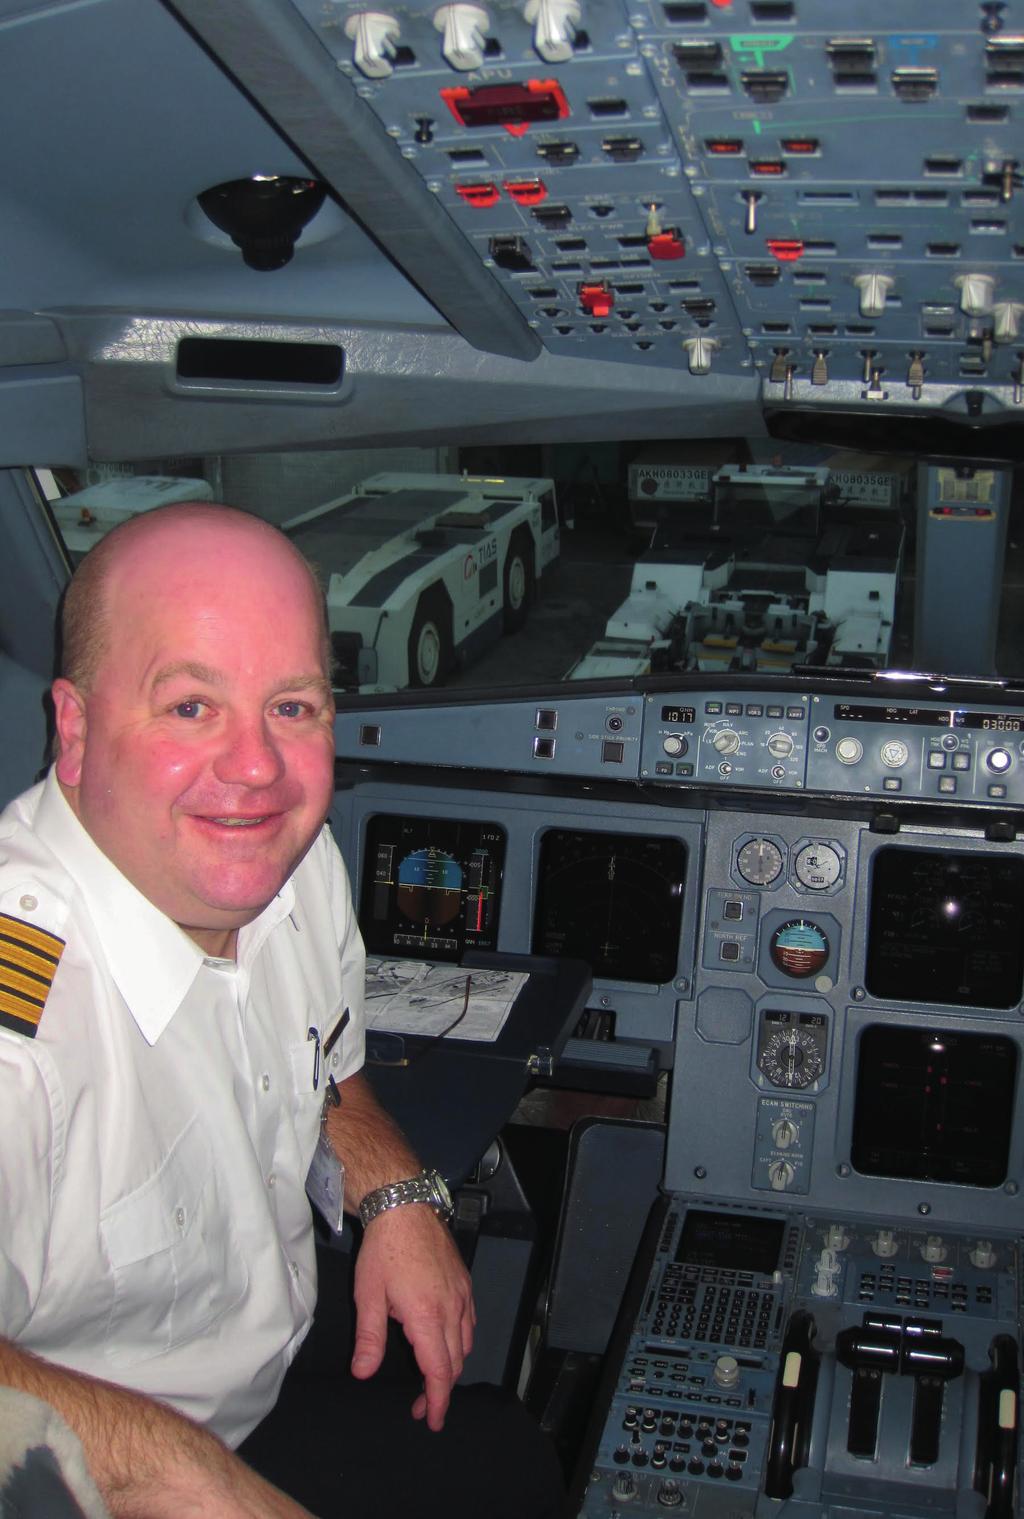 AIRLINE INTERVIEW Learn to Fly has teamed up with Captain Darren McPherson to offer a one day Airline Interview Skills Training program.